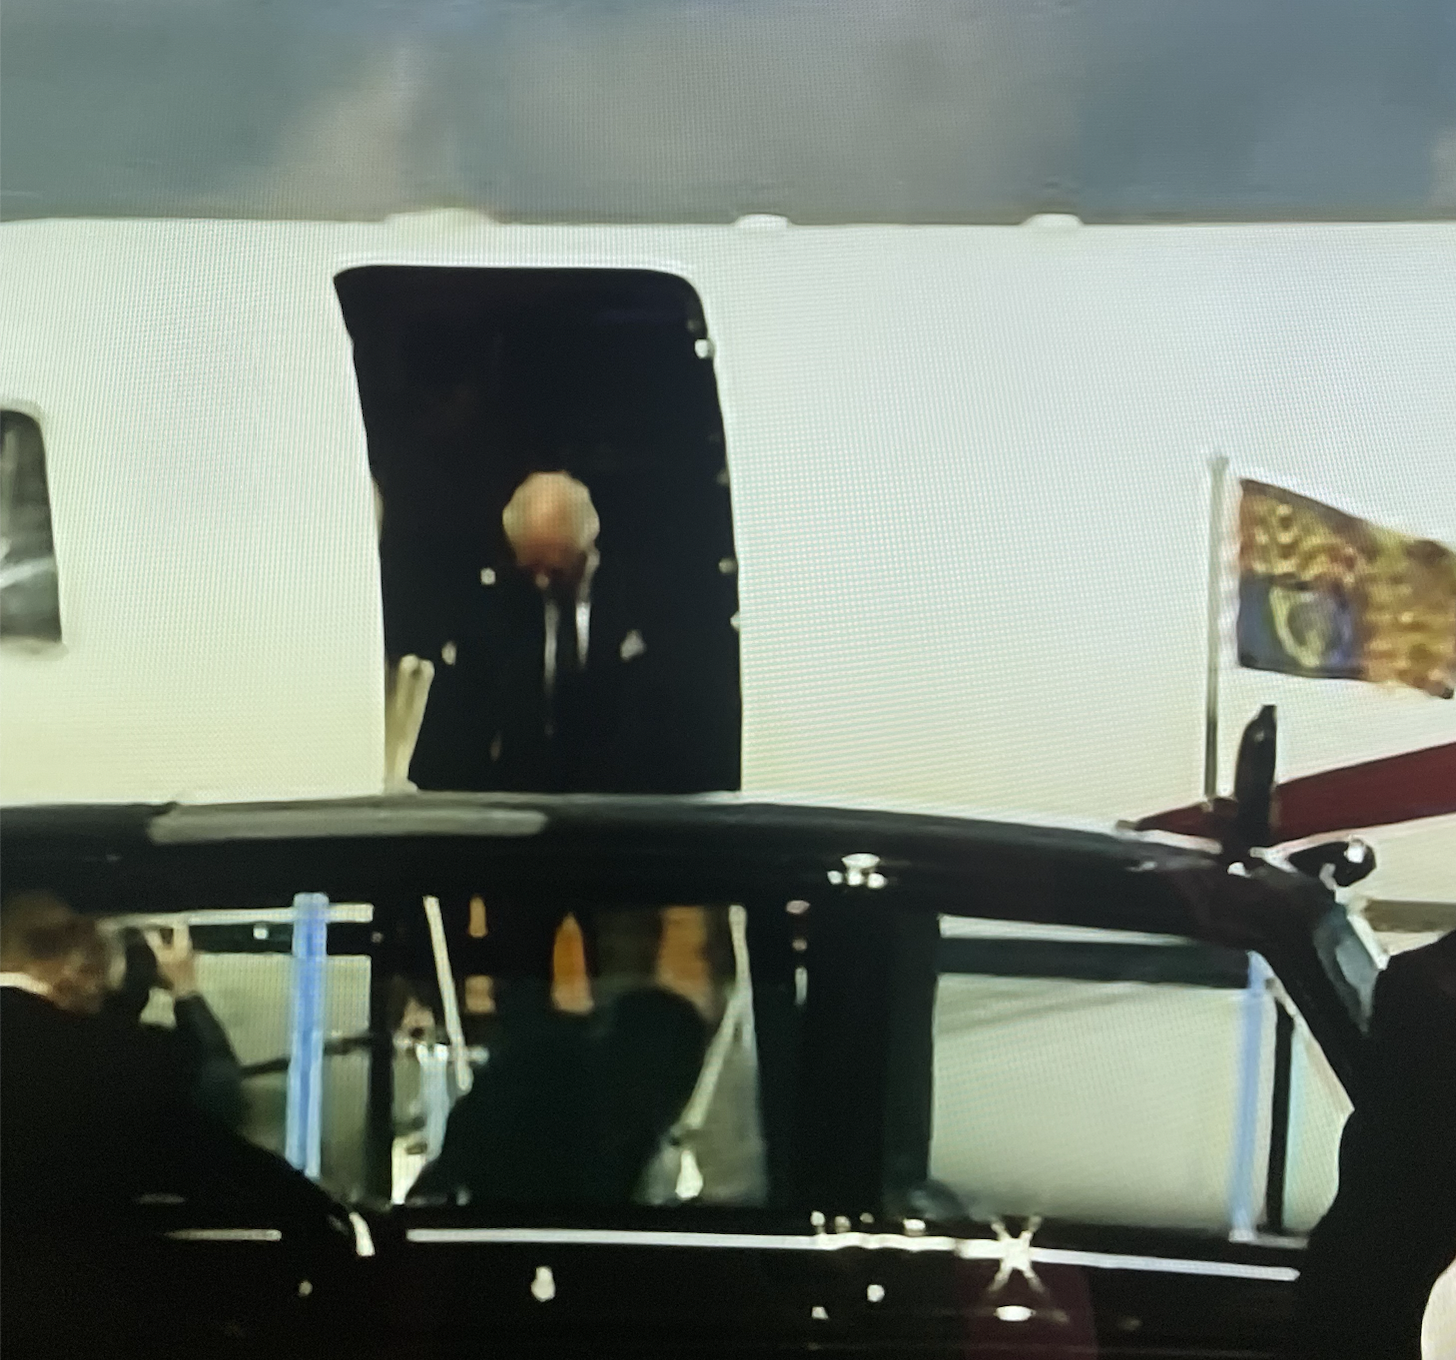 Charles arriving at Northolt airport from Balmoral.